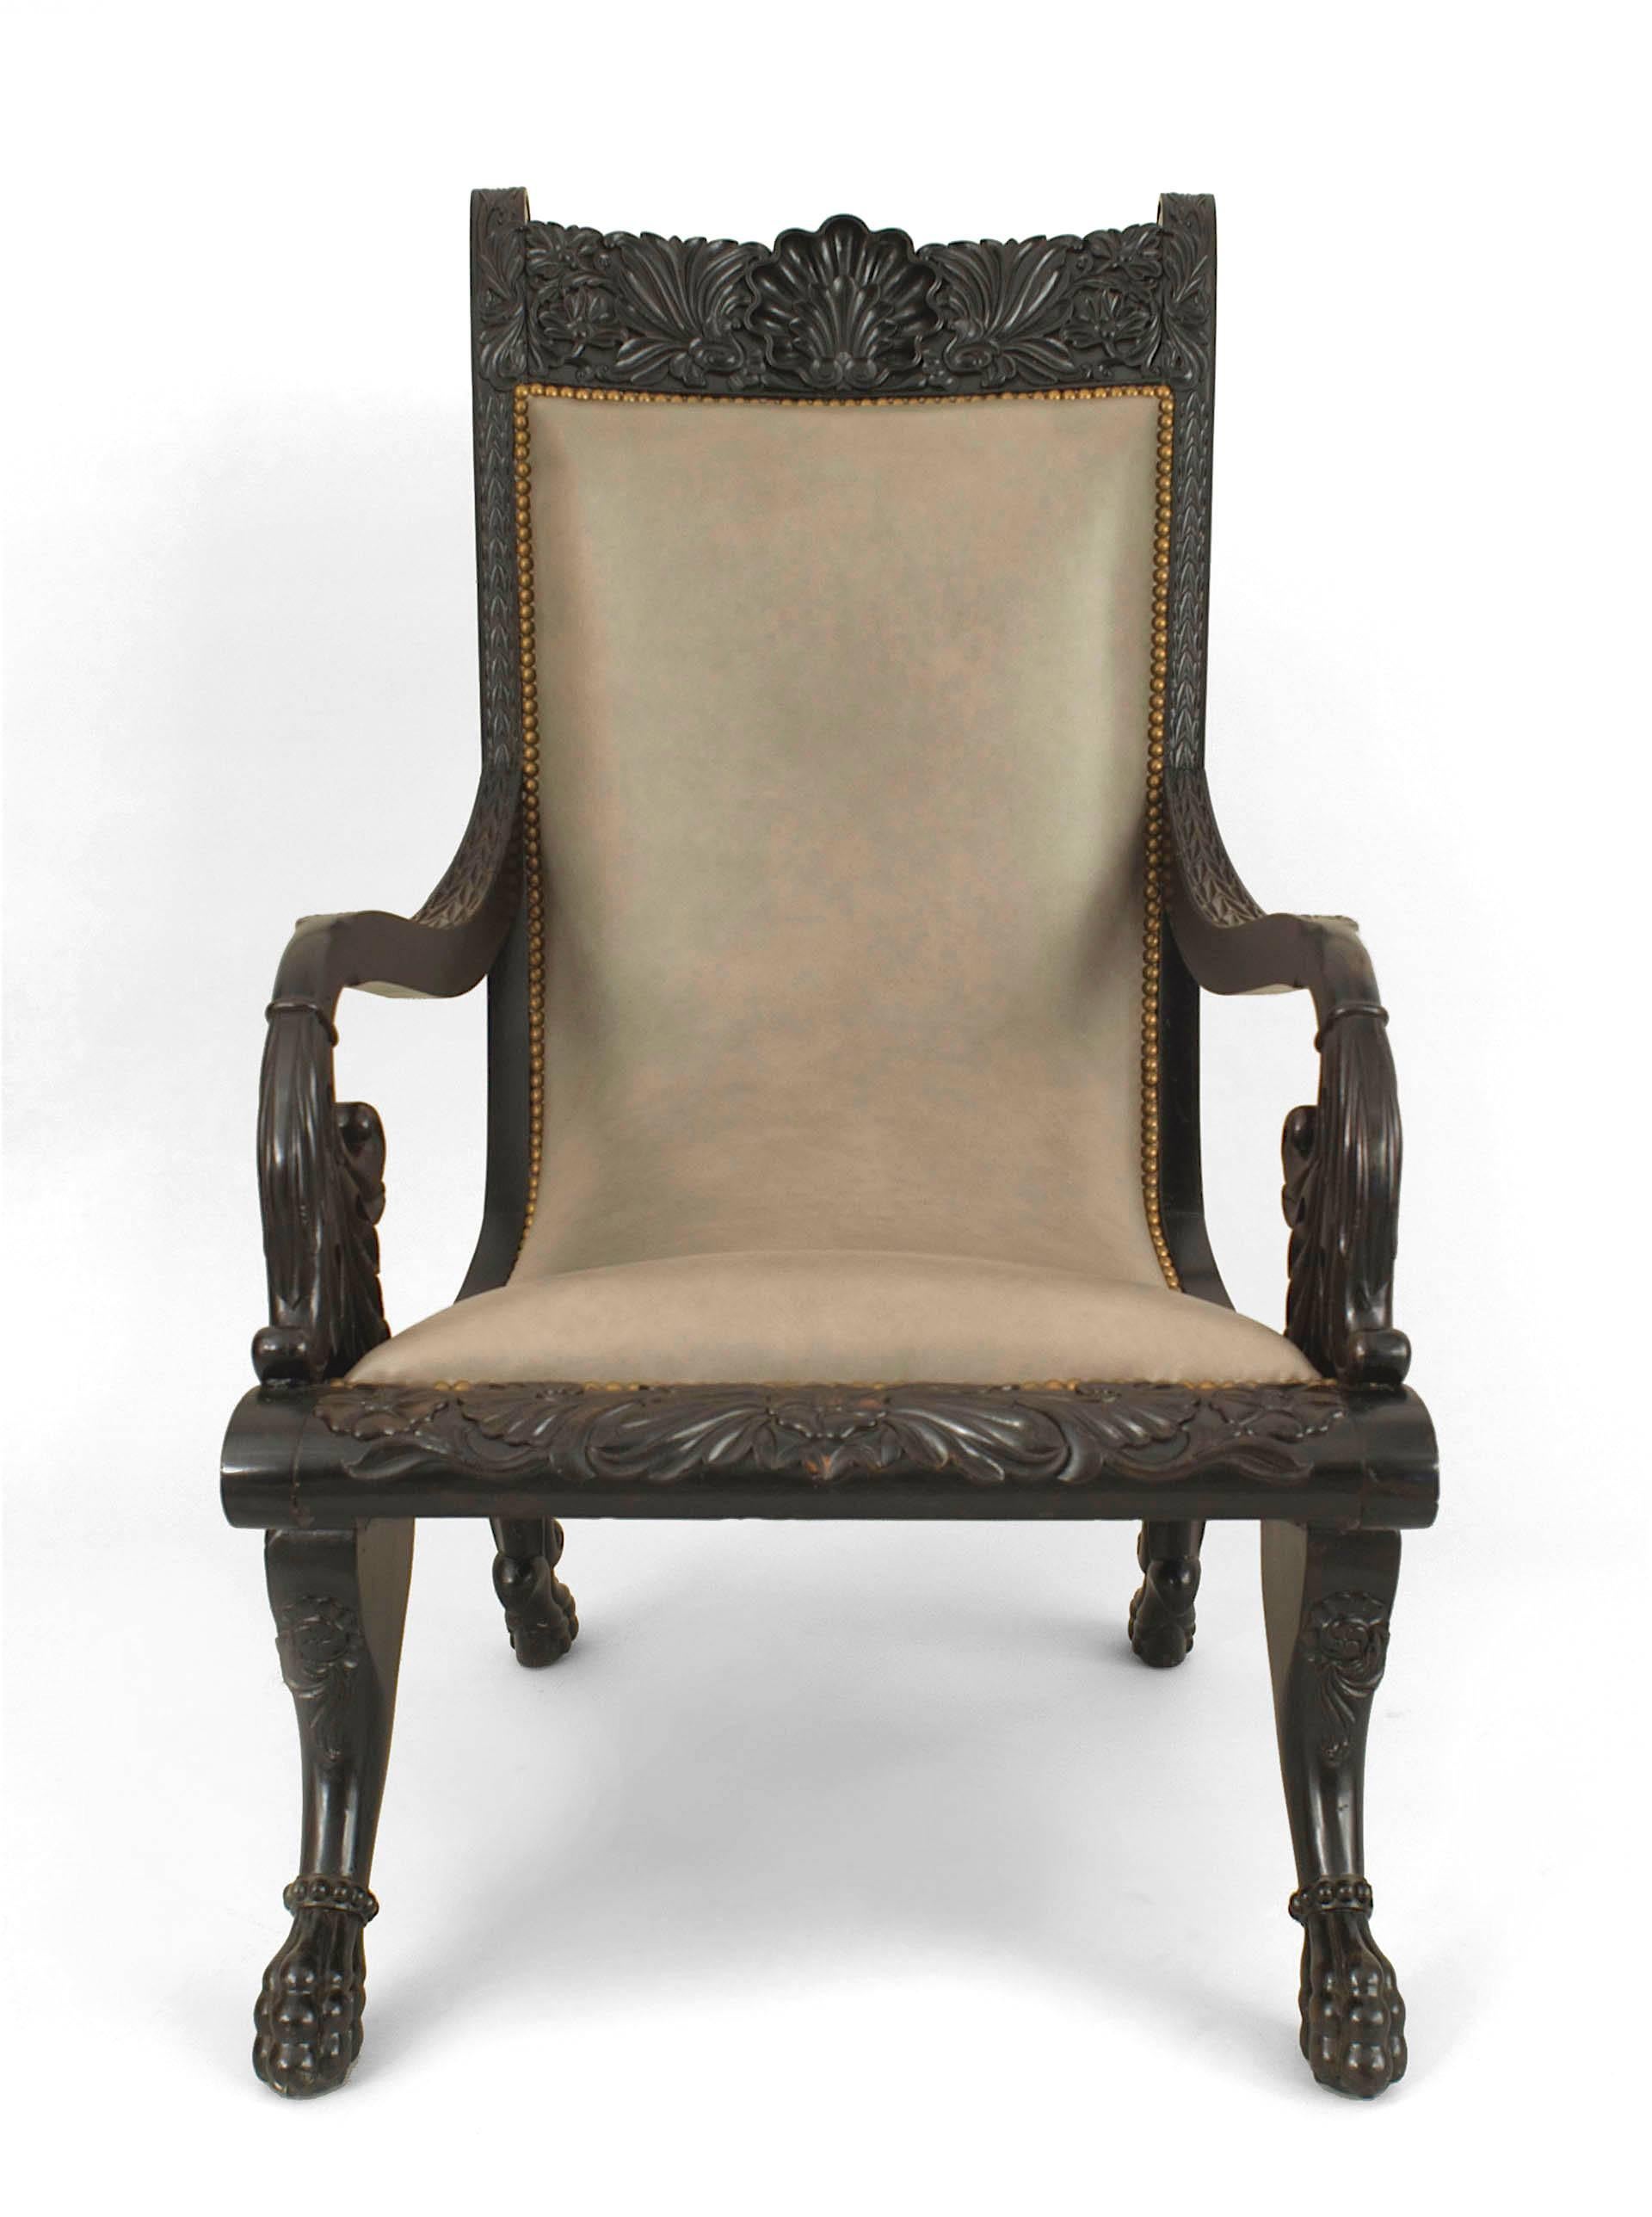 English Anglo-Indian (19th Century) ebony carved open armchair with a gray leather upholstered seat and back with nail heads.
